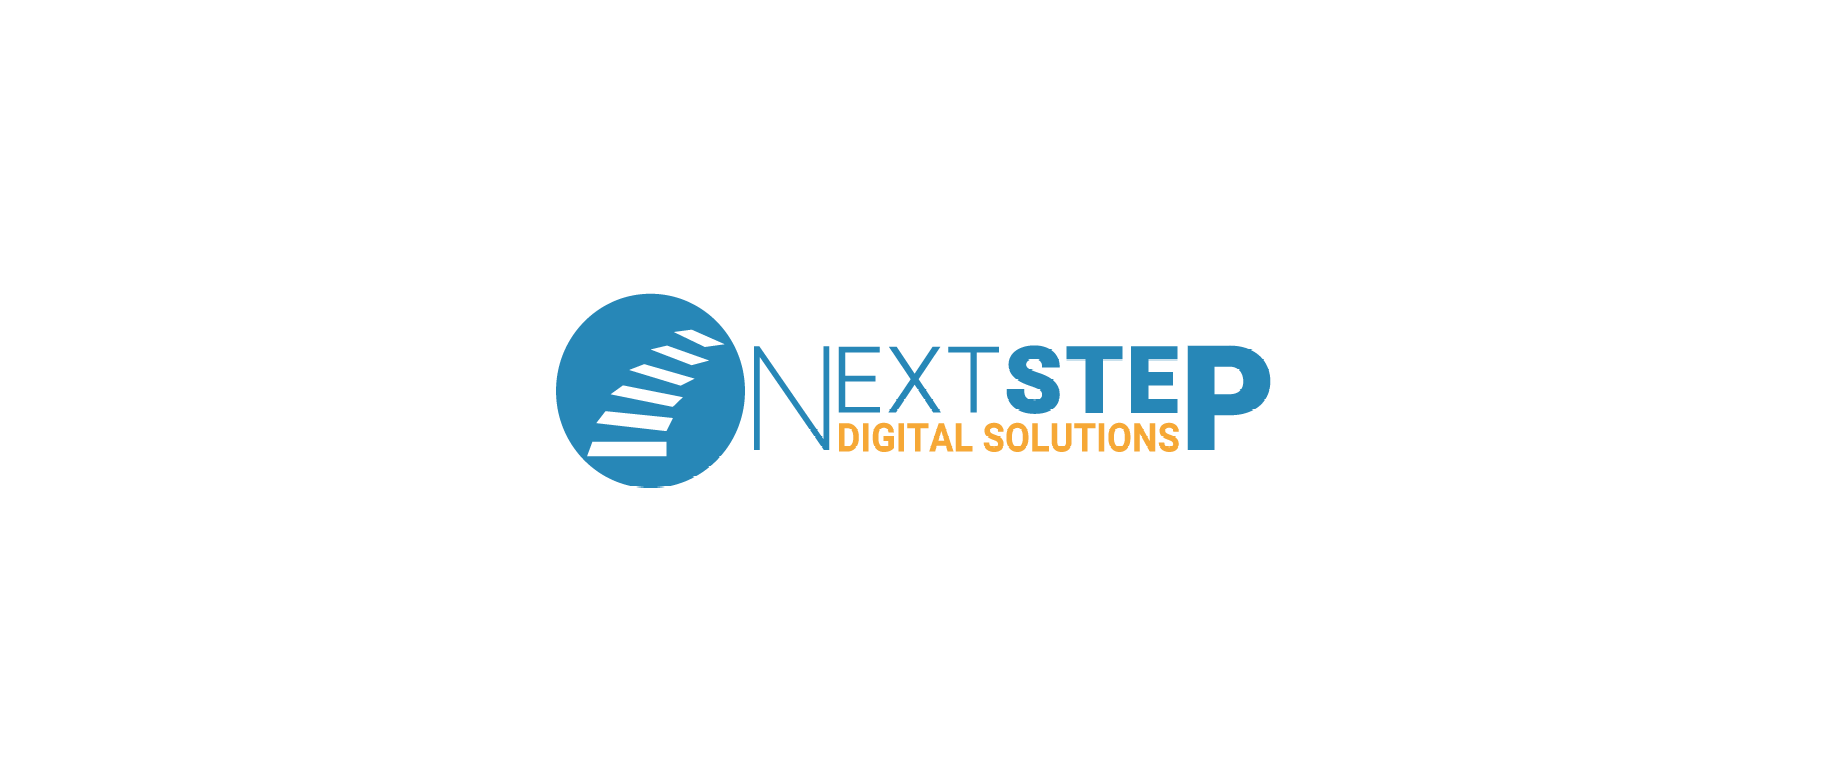 Elevate Your Brand - Next Step Digital Solutions